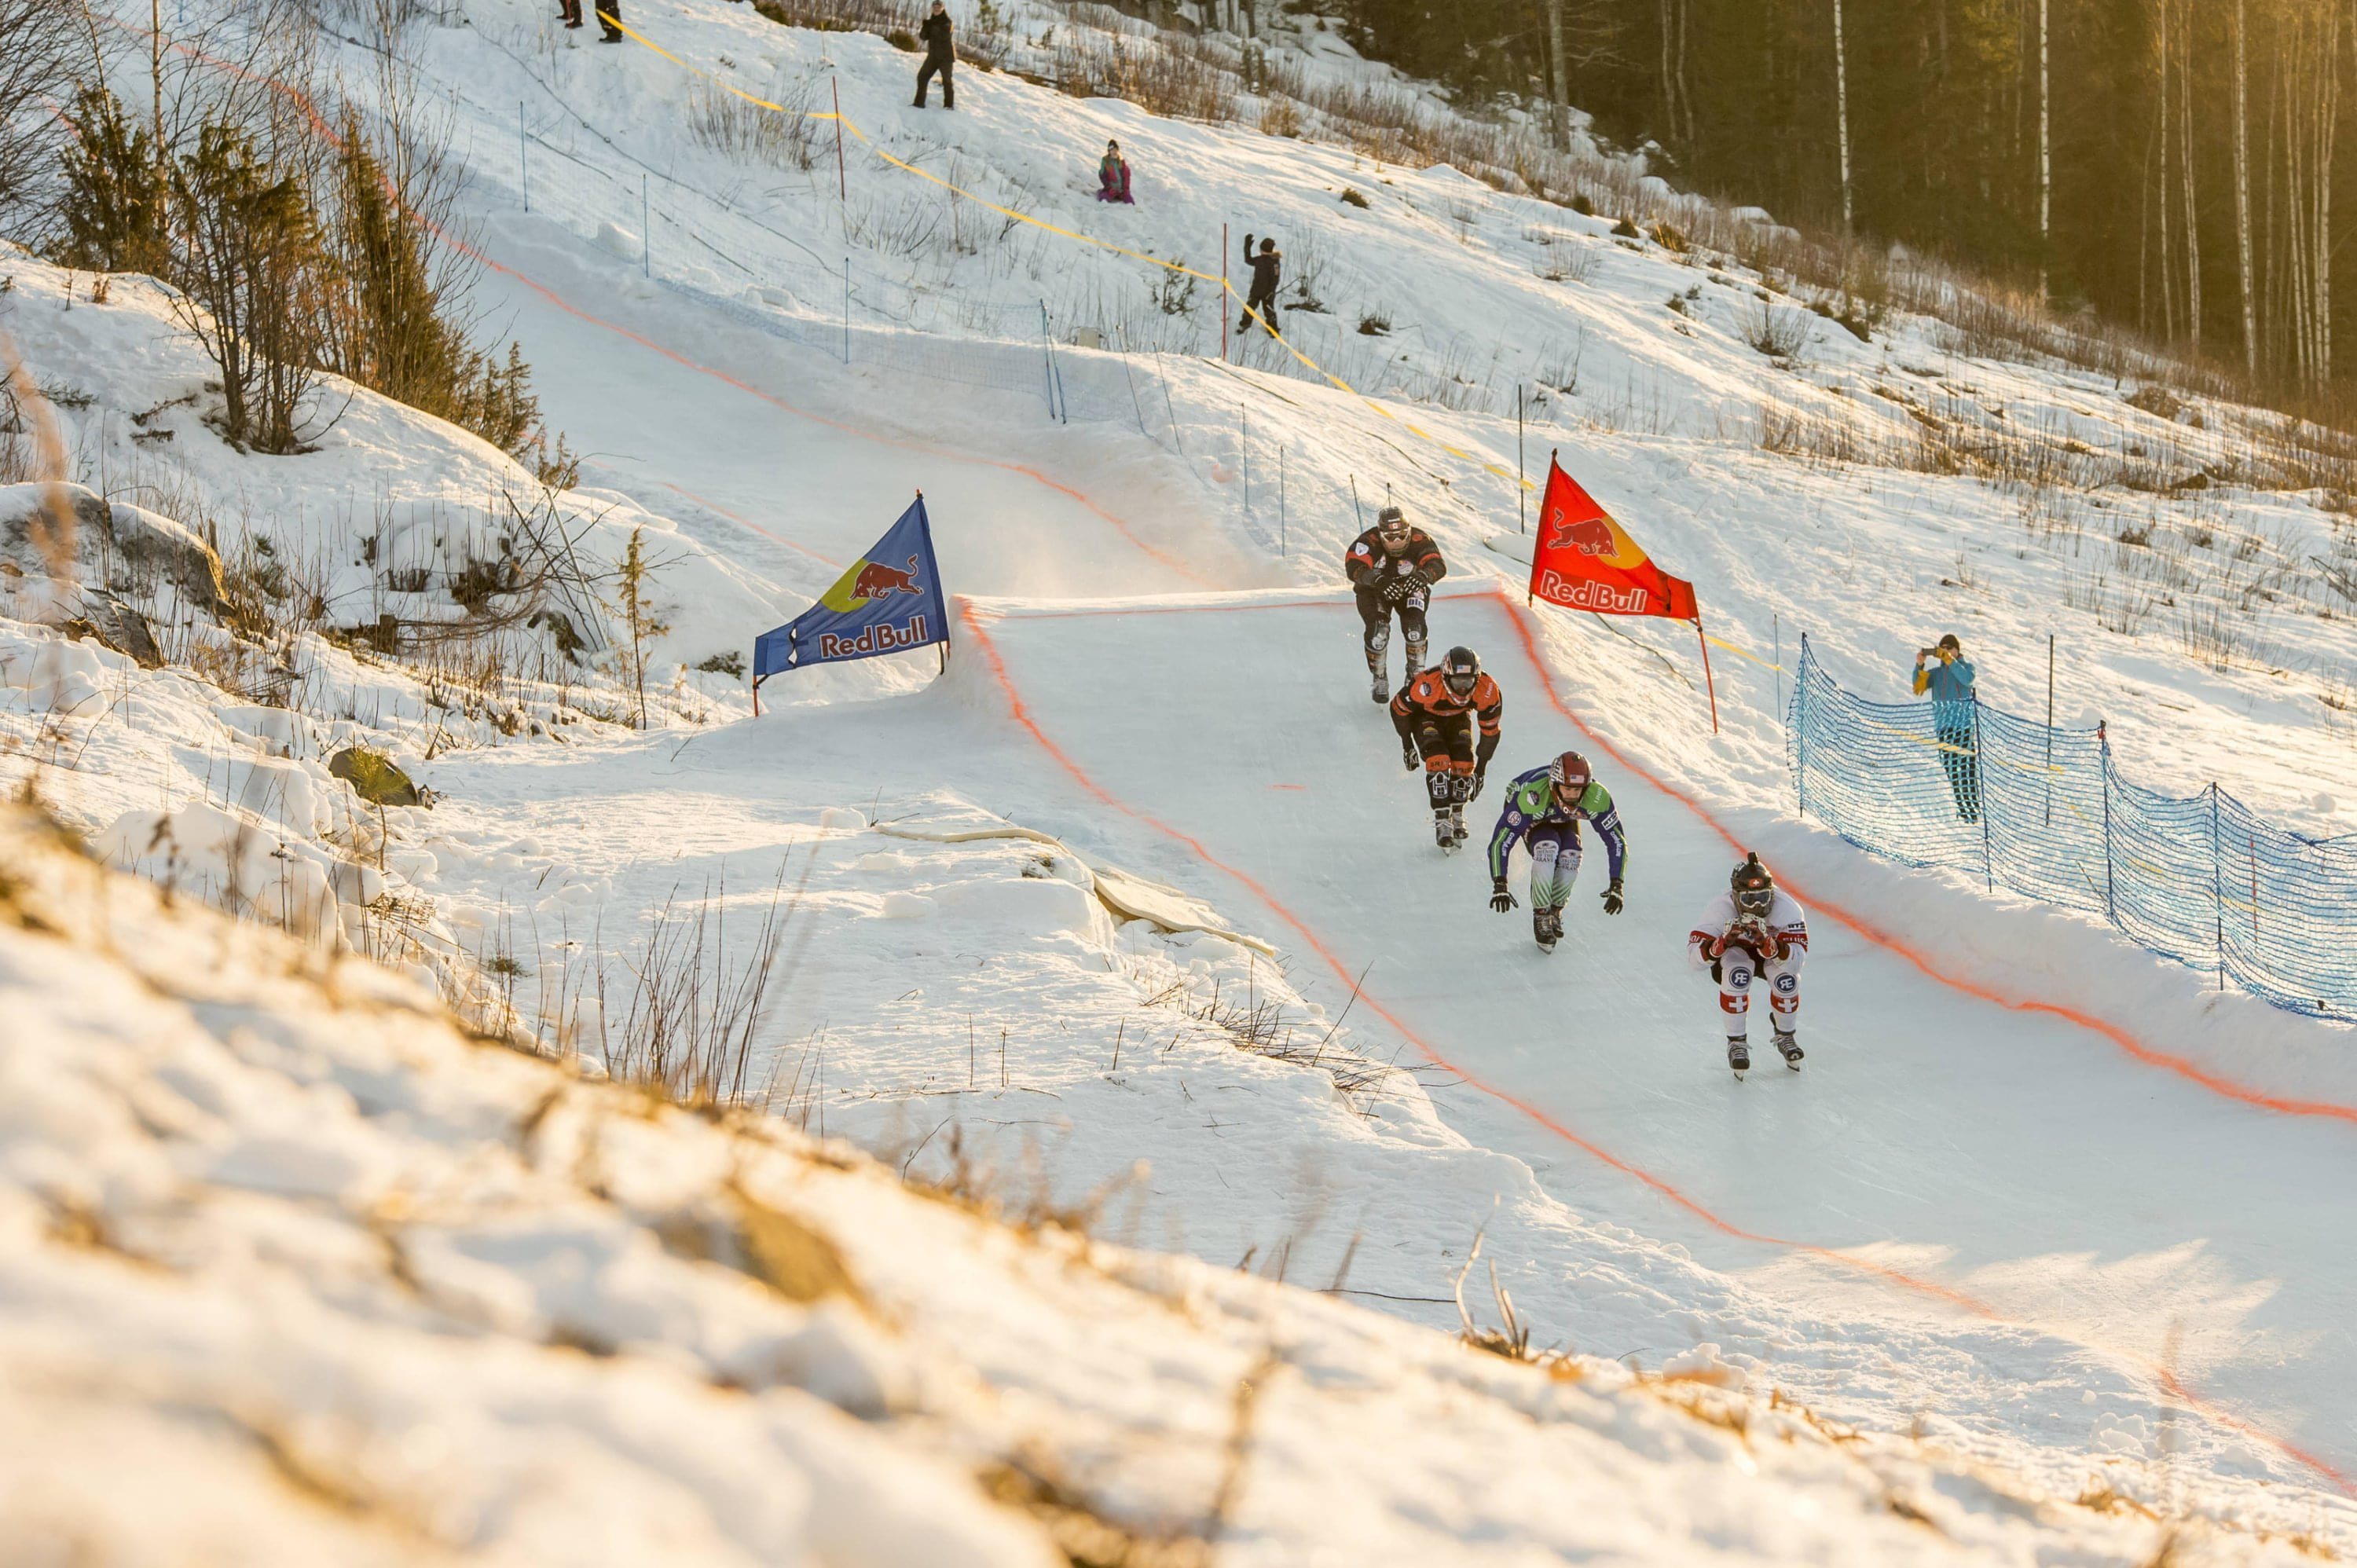 Jim De Paoli leads as he closes in on the Rautalampi finishing line. Image: Mark Roe / Red Bull Content Pool